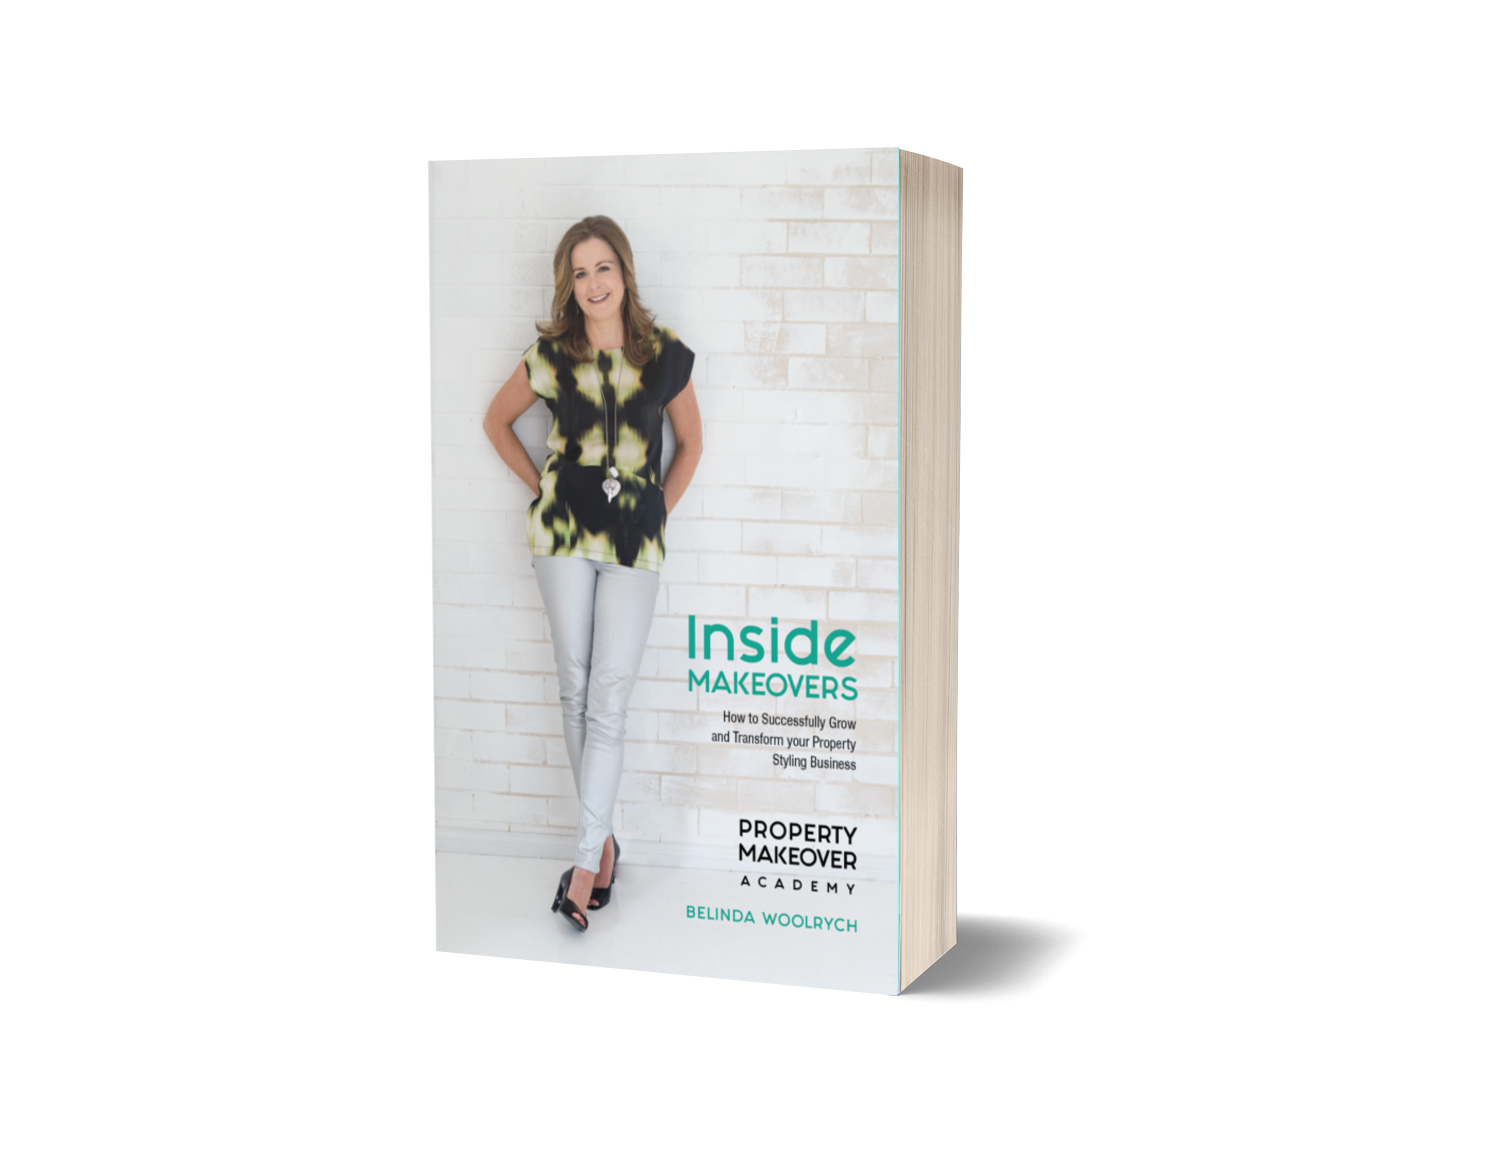 Inside Makeovers: How to Successfully Grow and Transform Your Property Styling Business